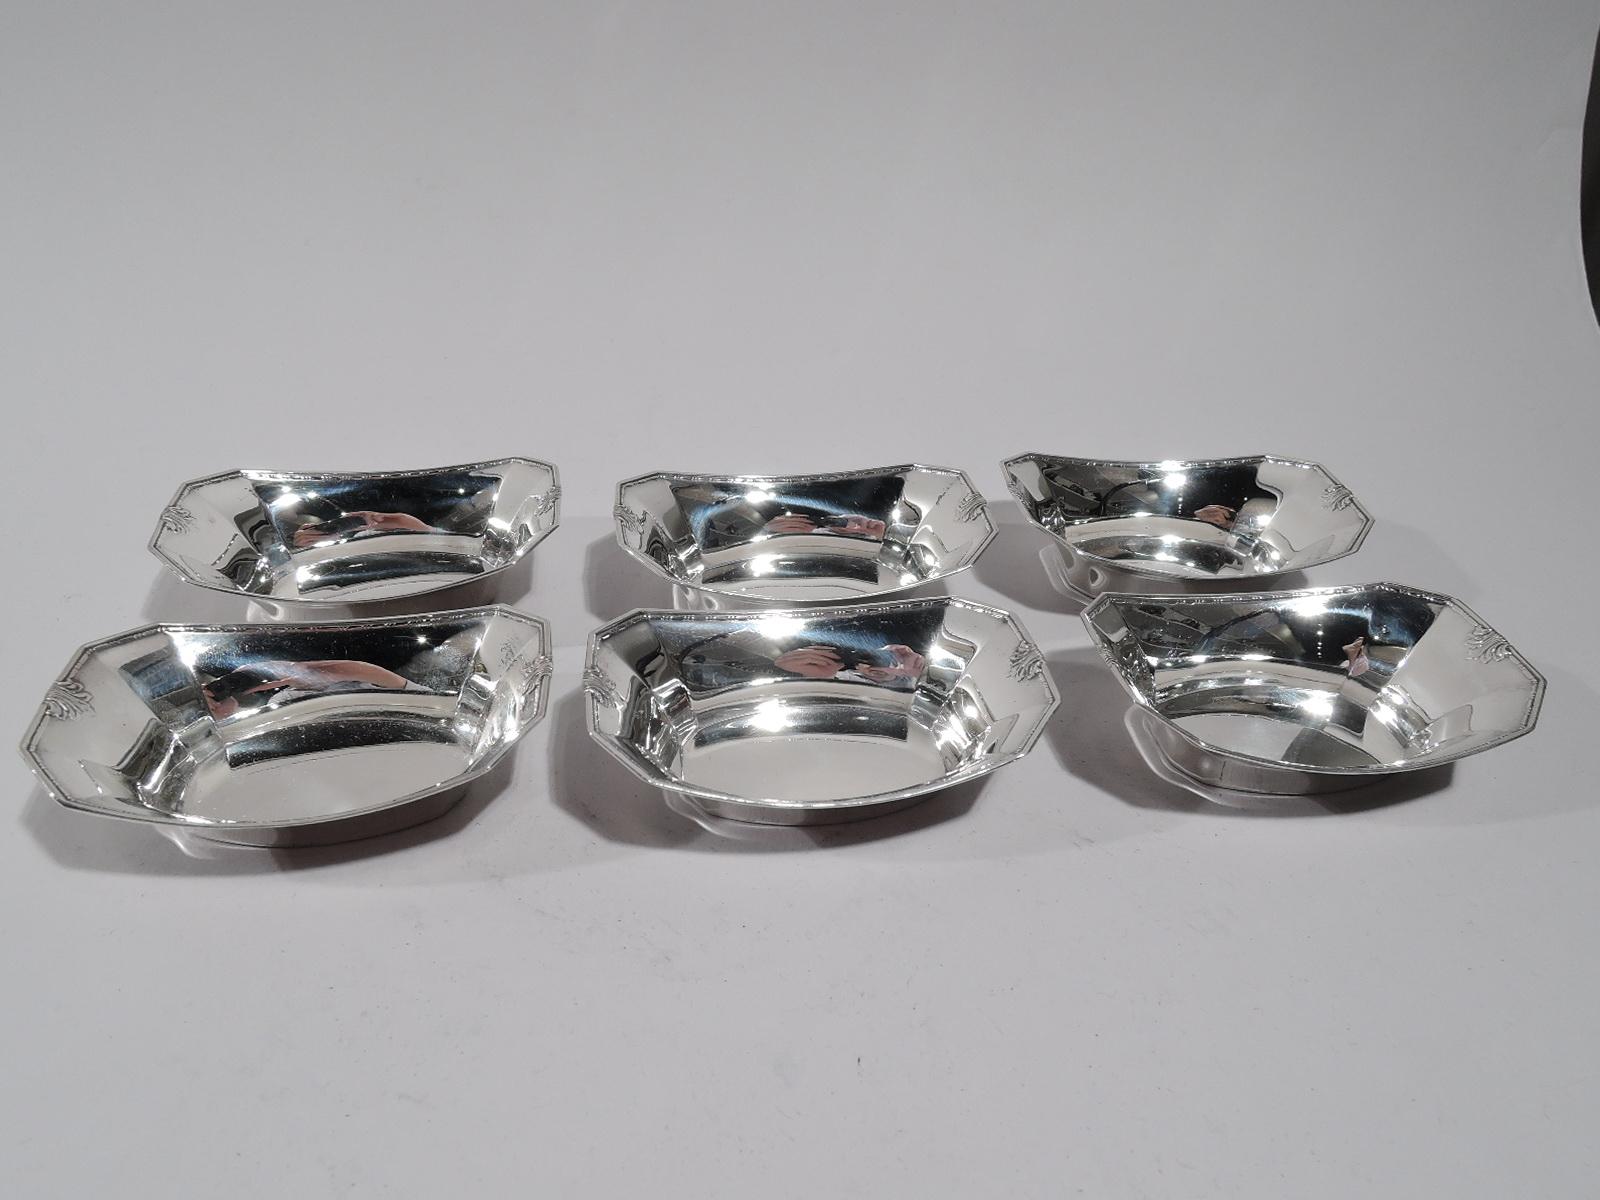 Set of 6 Edwardian sterling silver nut dishes. Made by Gorham in Providence in 1931. Ovalish well with tapering sides and chamfered corners. Chased bead-and-reel rim and leaves at ends. Fully marked including no. 1065 and date symbol. Total weight: